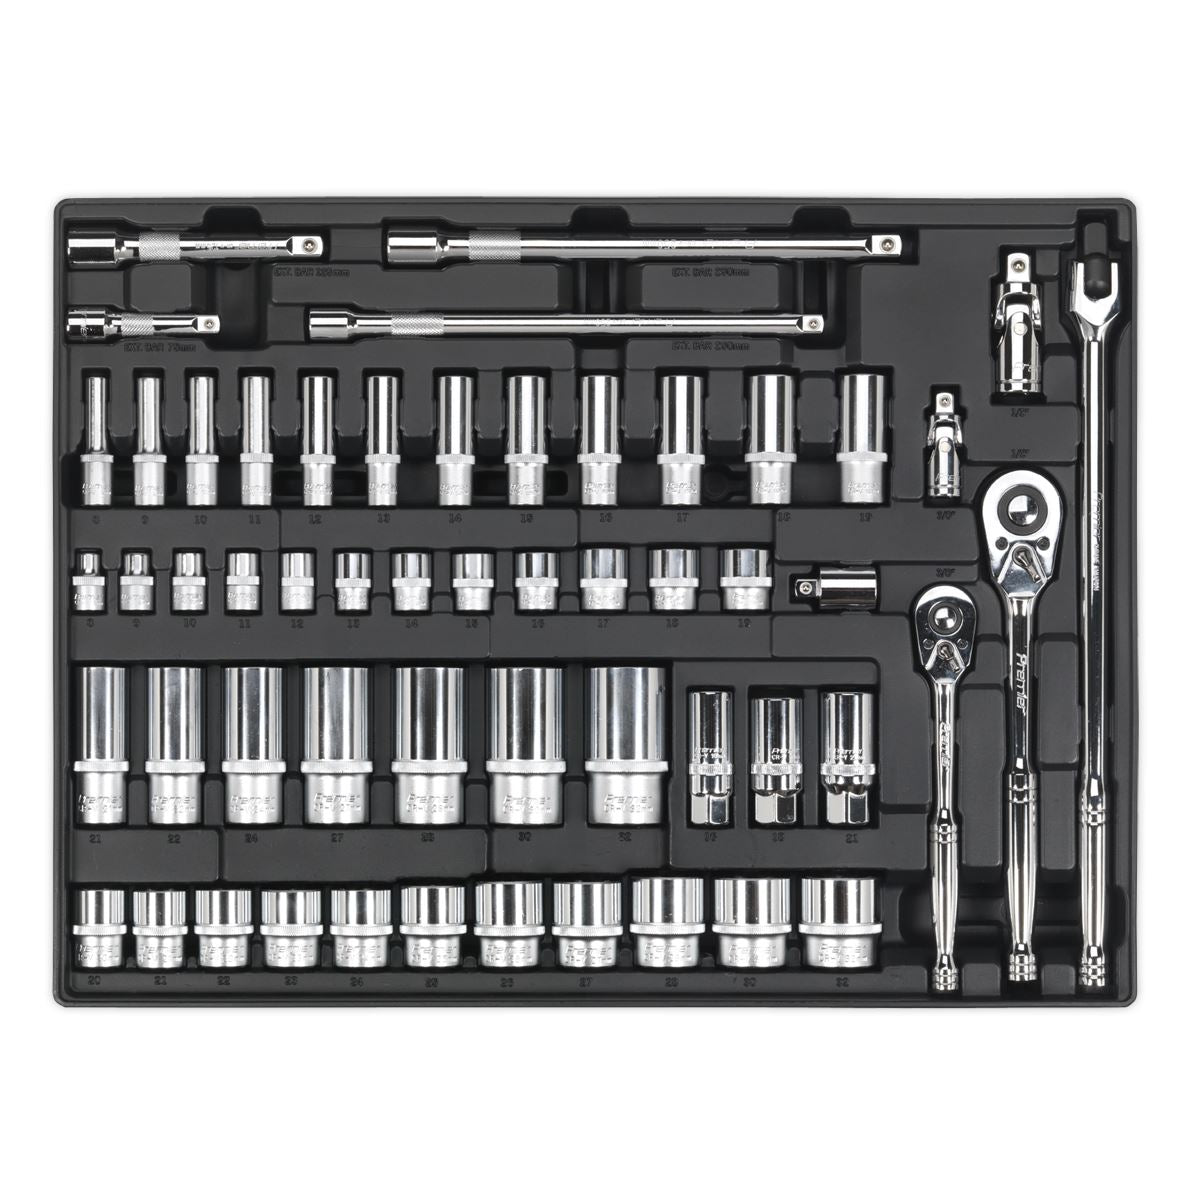 Sealey Premier Tool Tray with Socket Set 55pc 3/8" & 1/2"Sq Drive